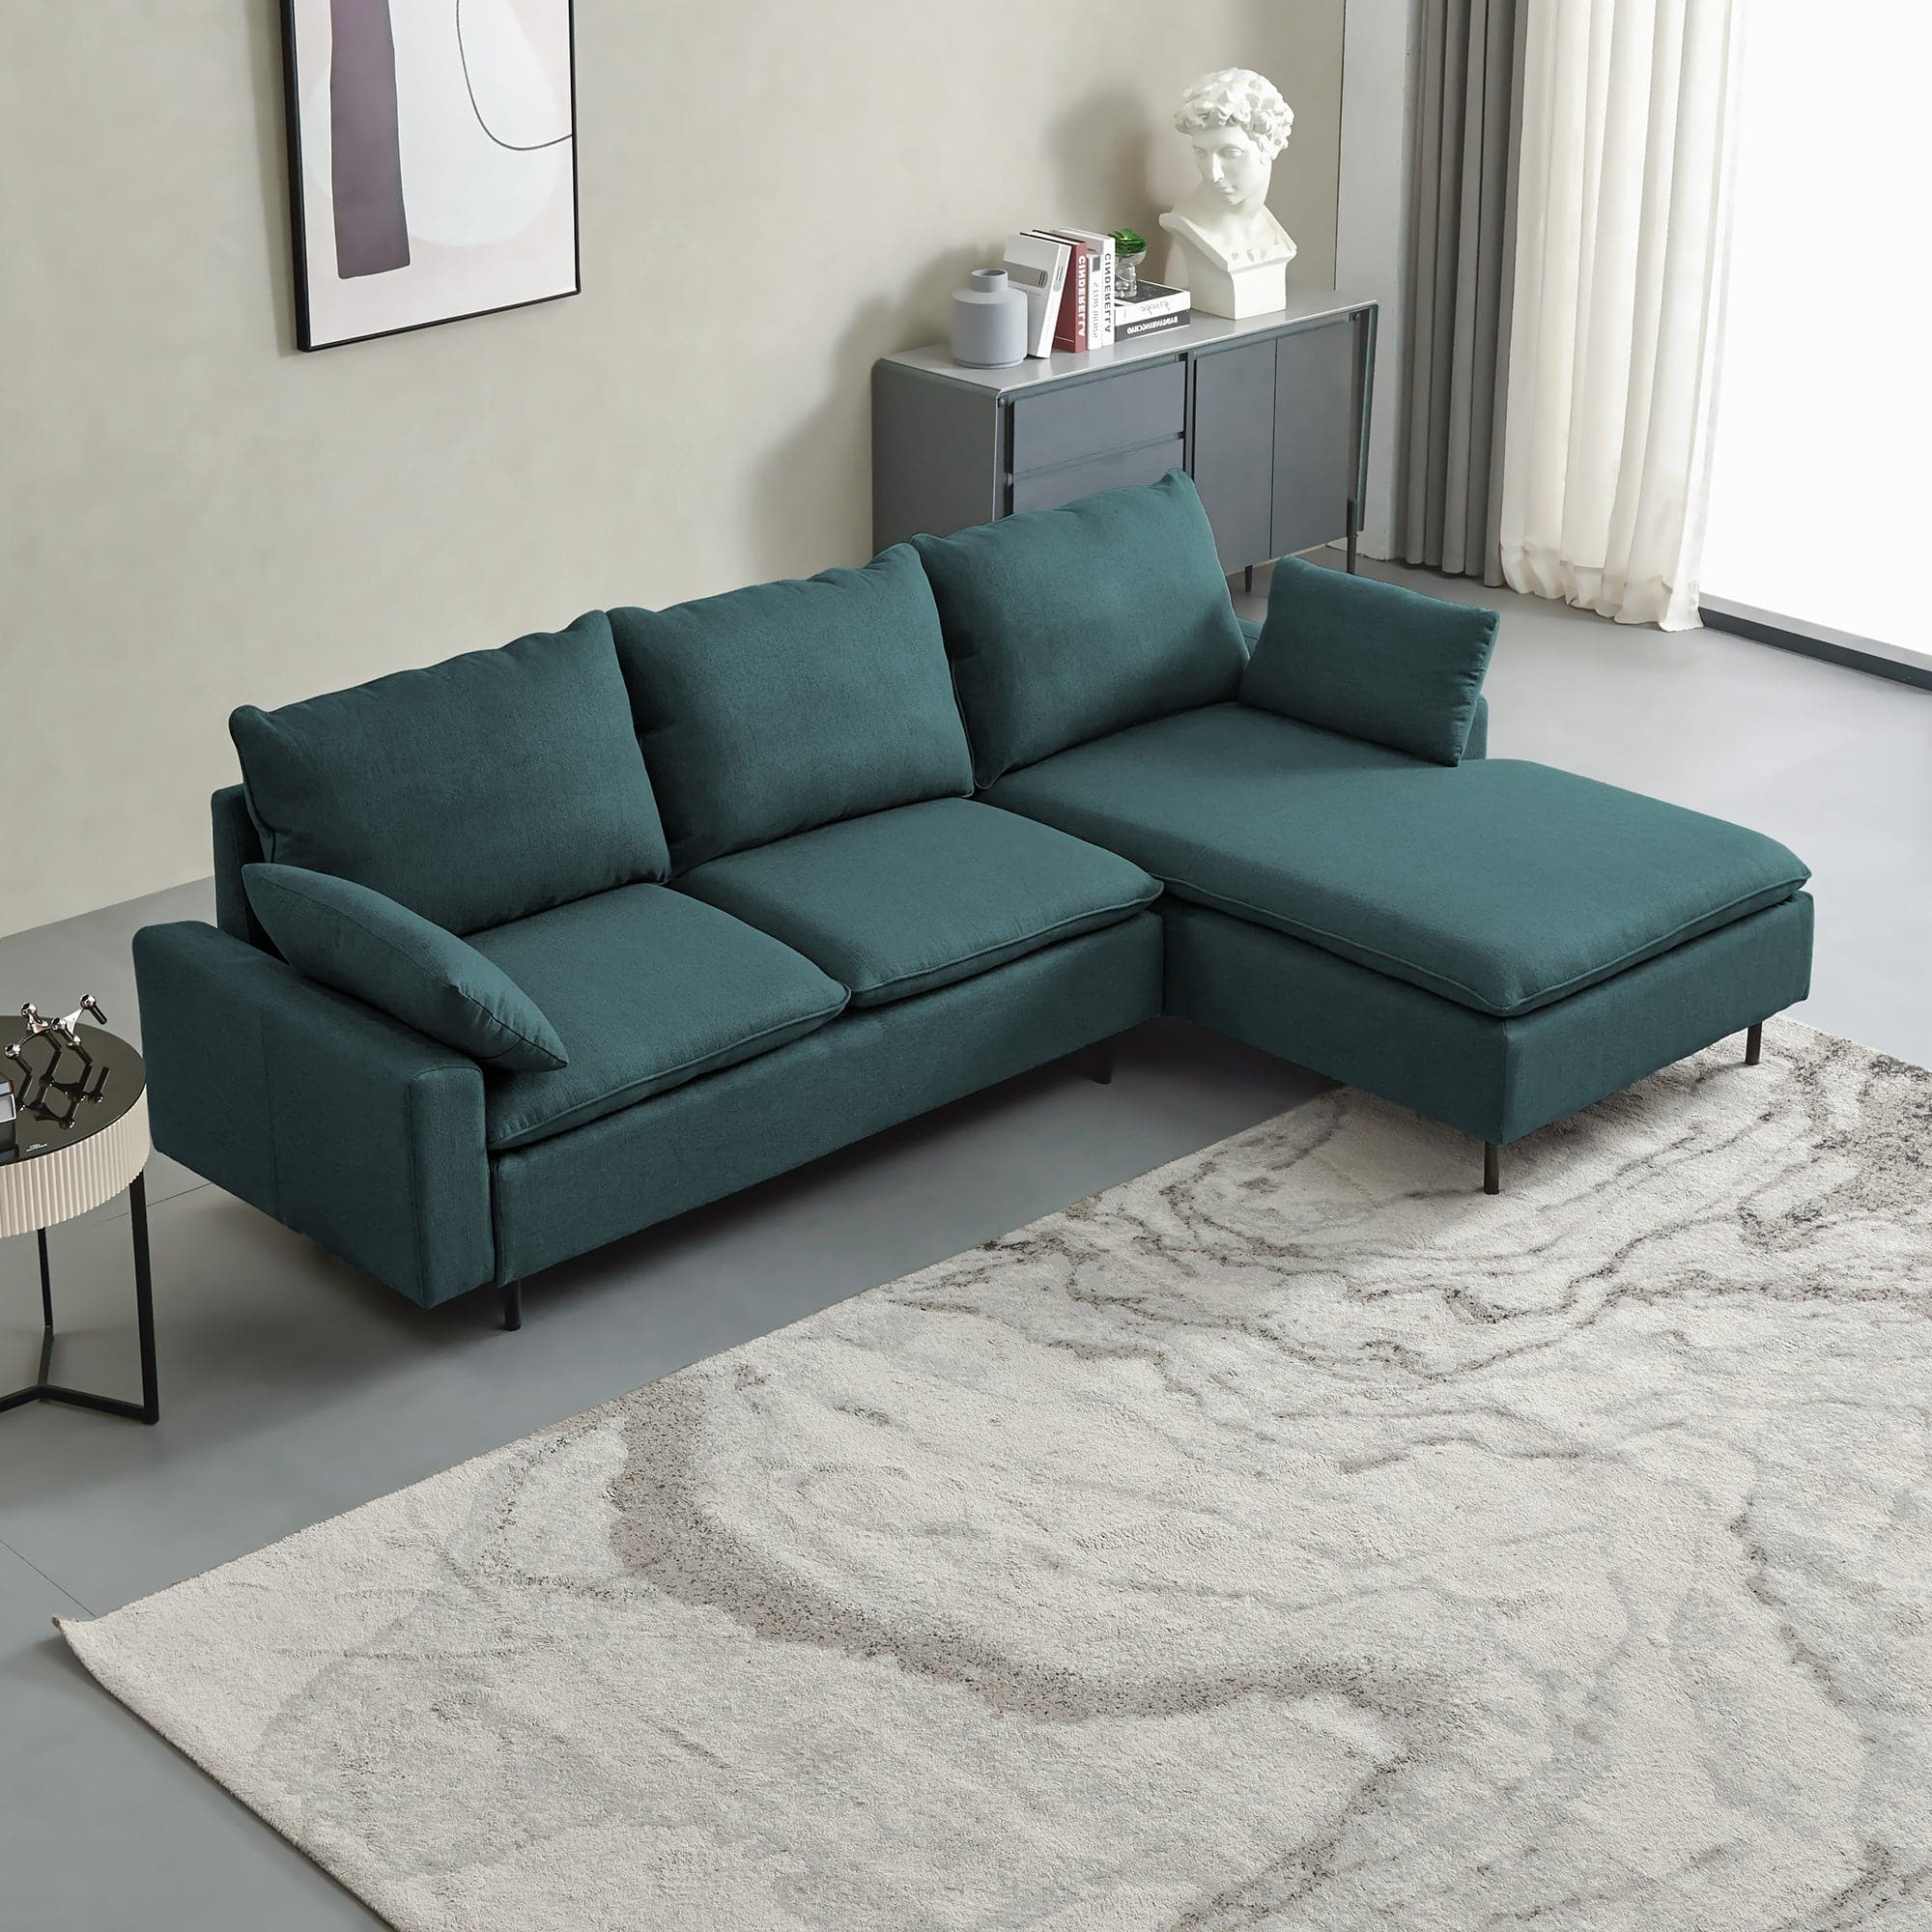 - TFC&H Co. L-Shaped Linen Sectional Sofa w/ Left Chaise - Muted Green- Ships from The US - sectional at TFC&H Co.